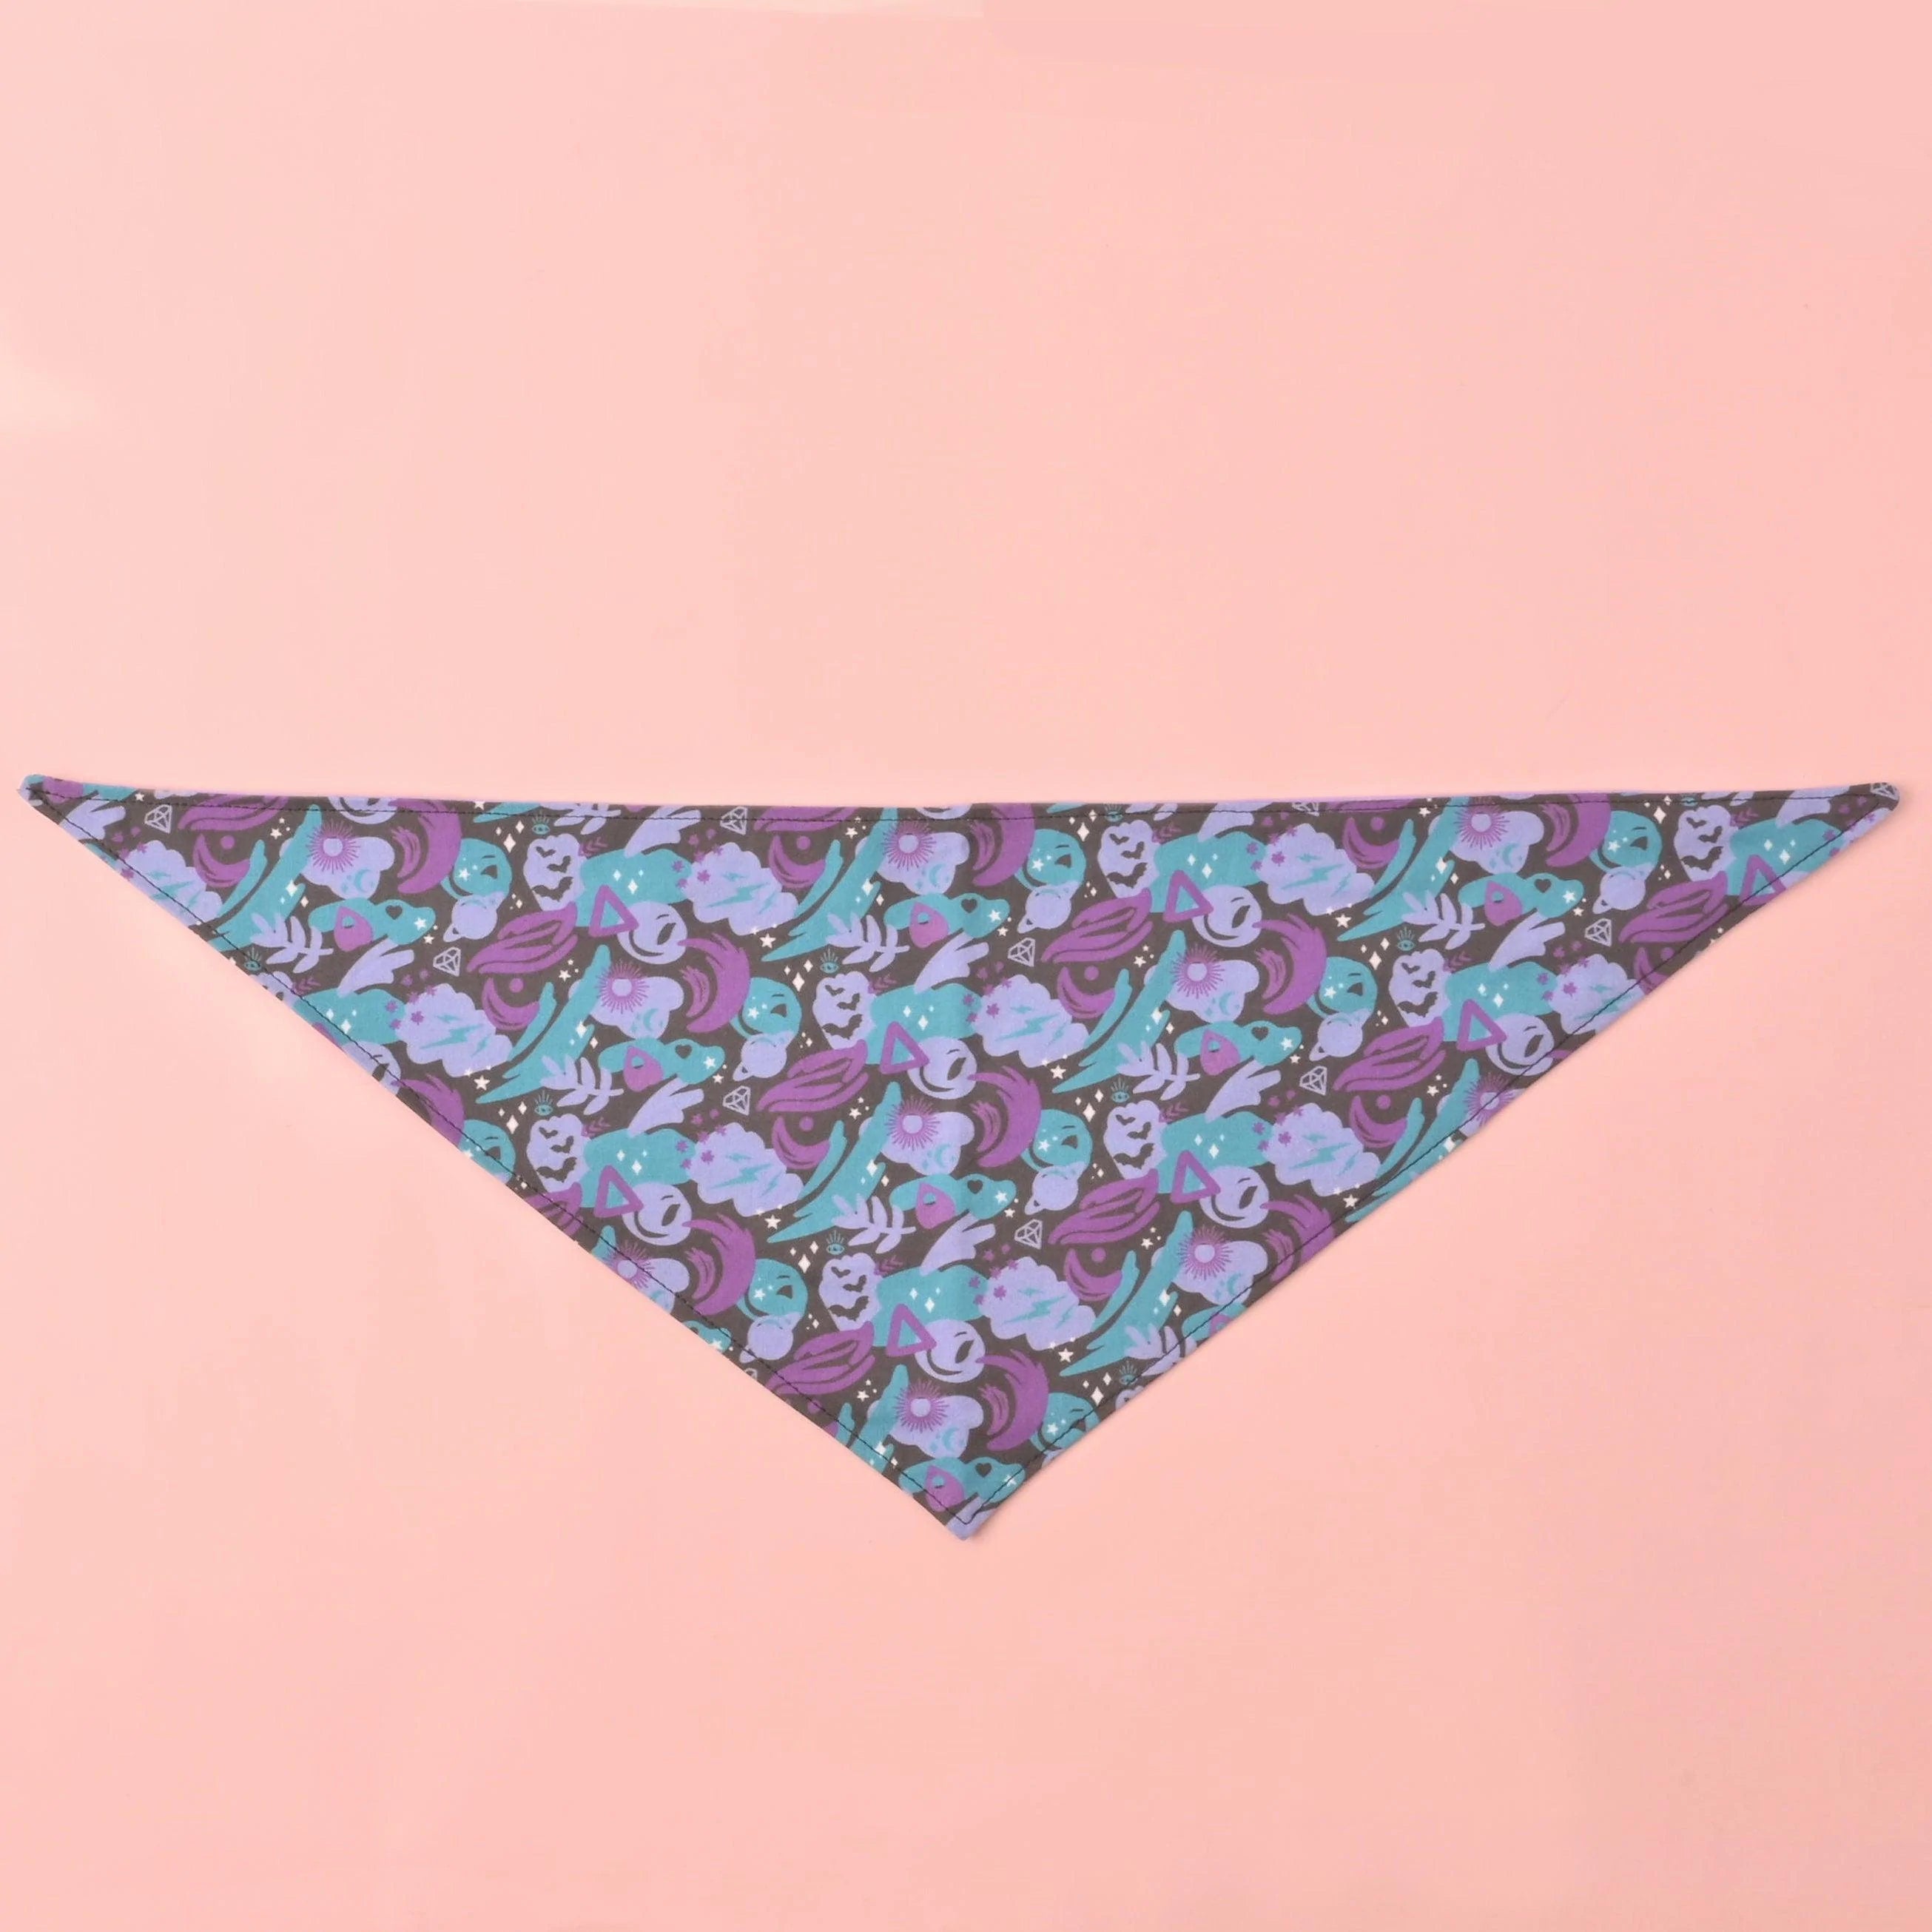 Spooky Magic Pet Bandana, Halloween Style, Cute Witch Dog and Cat Collar Necklace, Lavender, Teal and Black